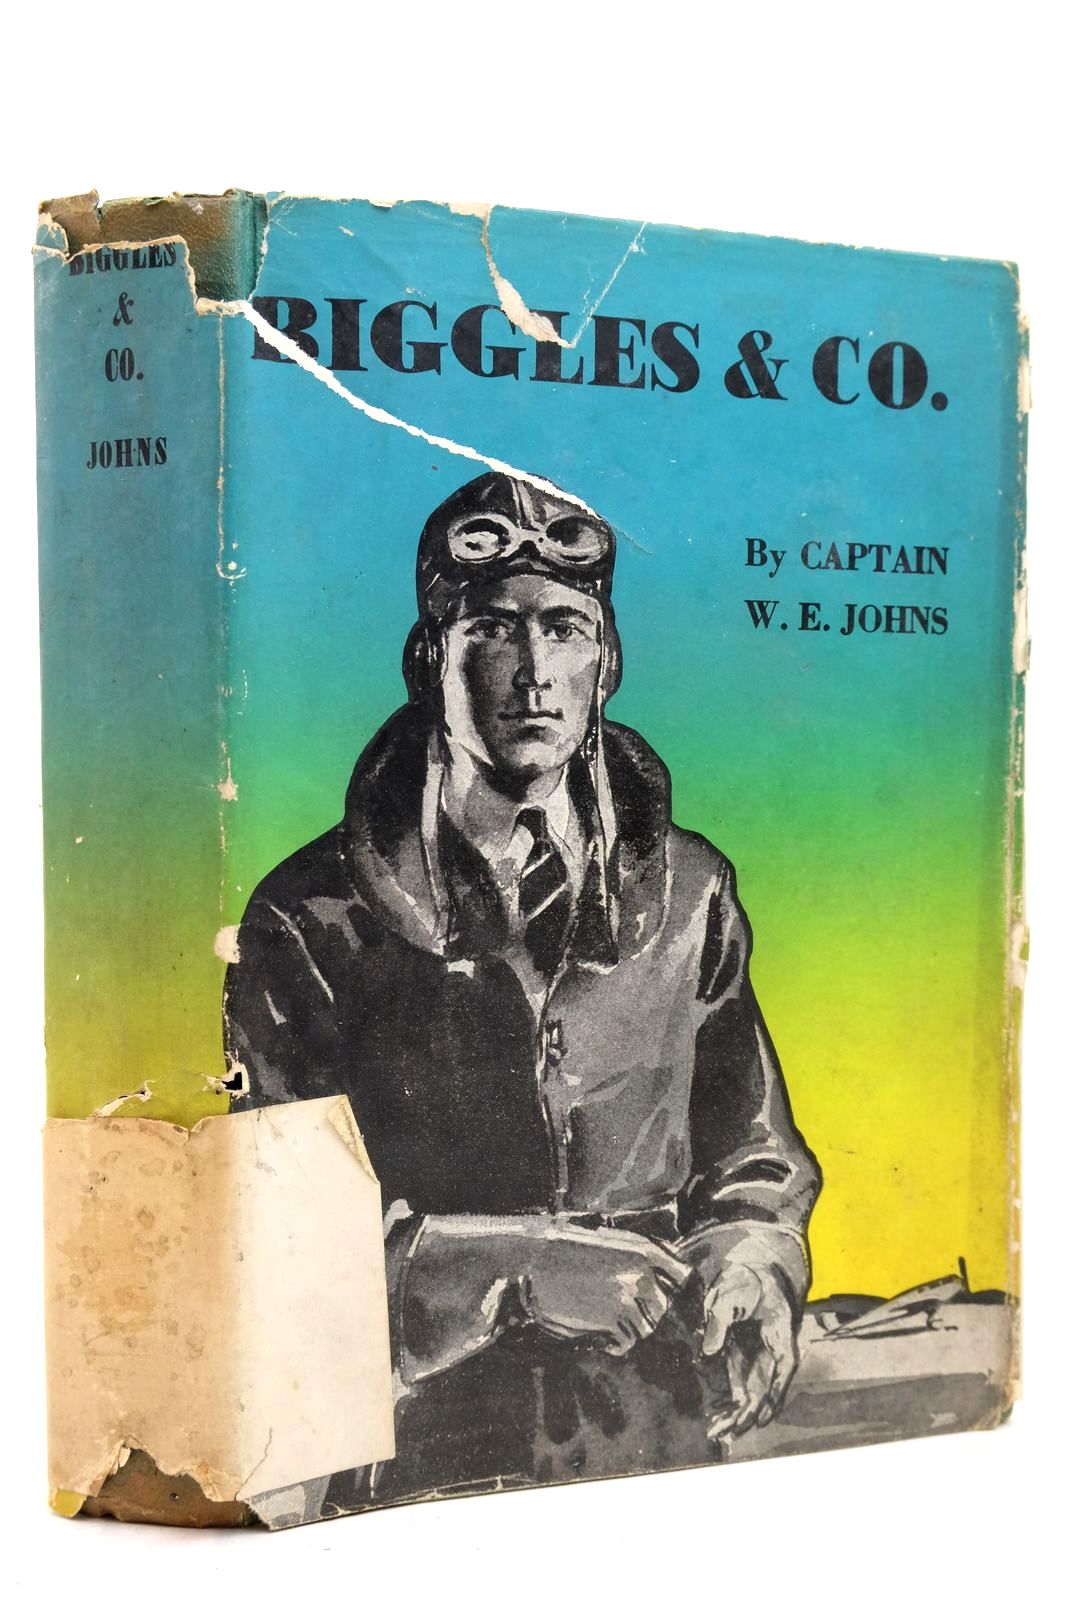 Photo of BIGGLES & CO. written by Johns, W.E. illustrated by Sindall, Alfred published by Oxford University Press, Geoffrey Cumberlege (STOCK CODE: 2139776)  for sale by Stella & Rose's Books